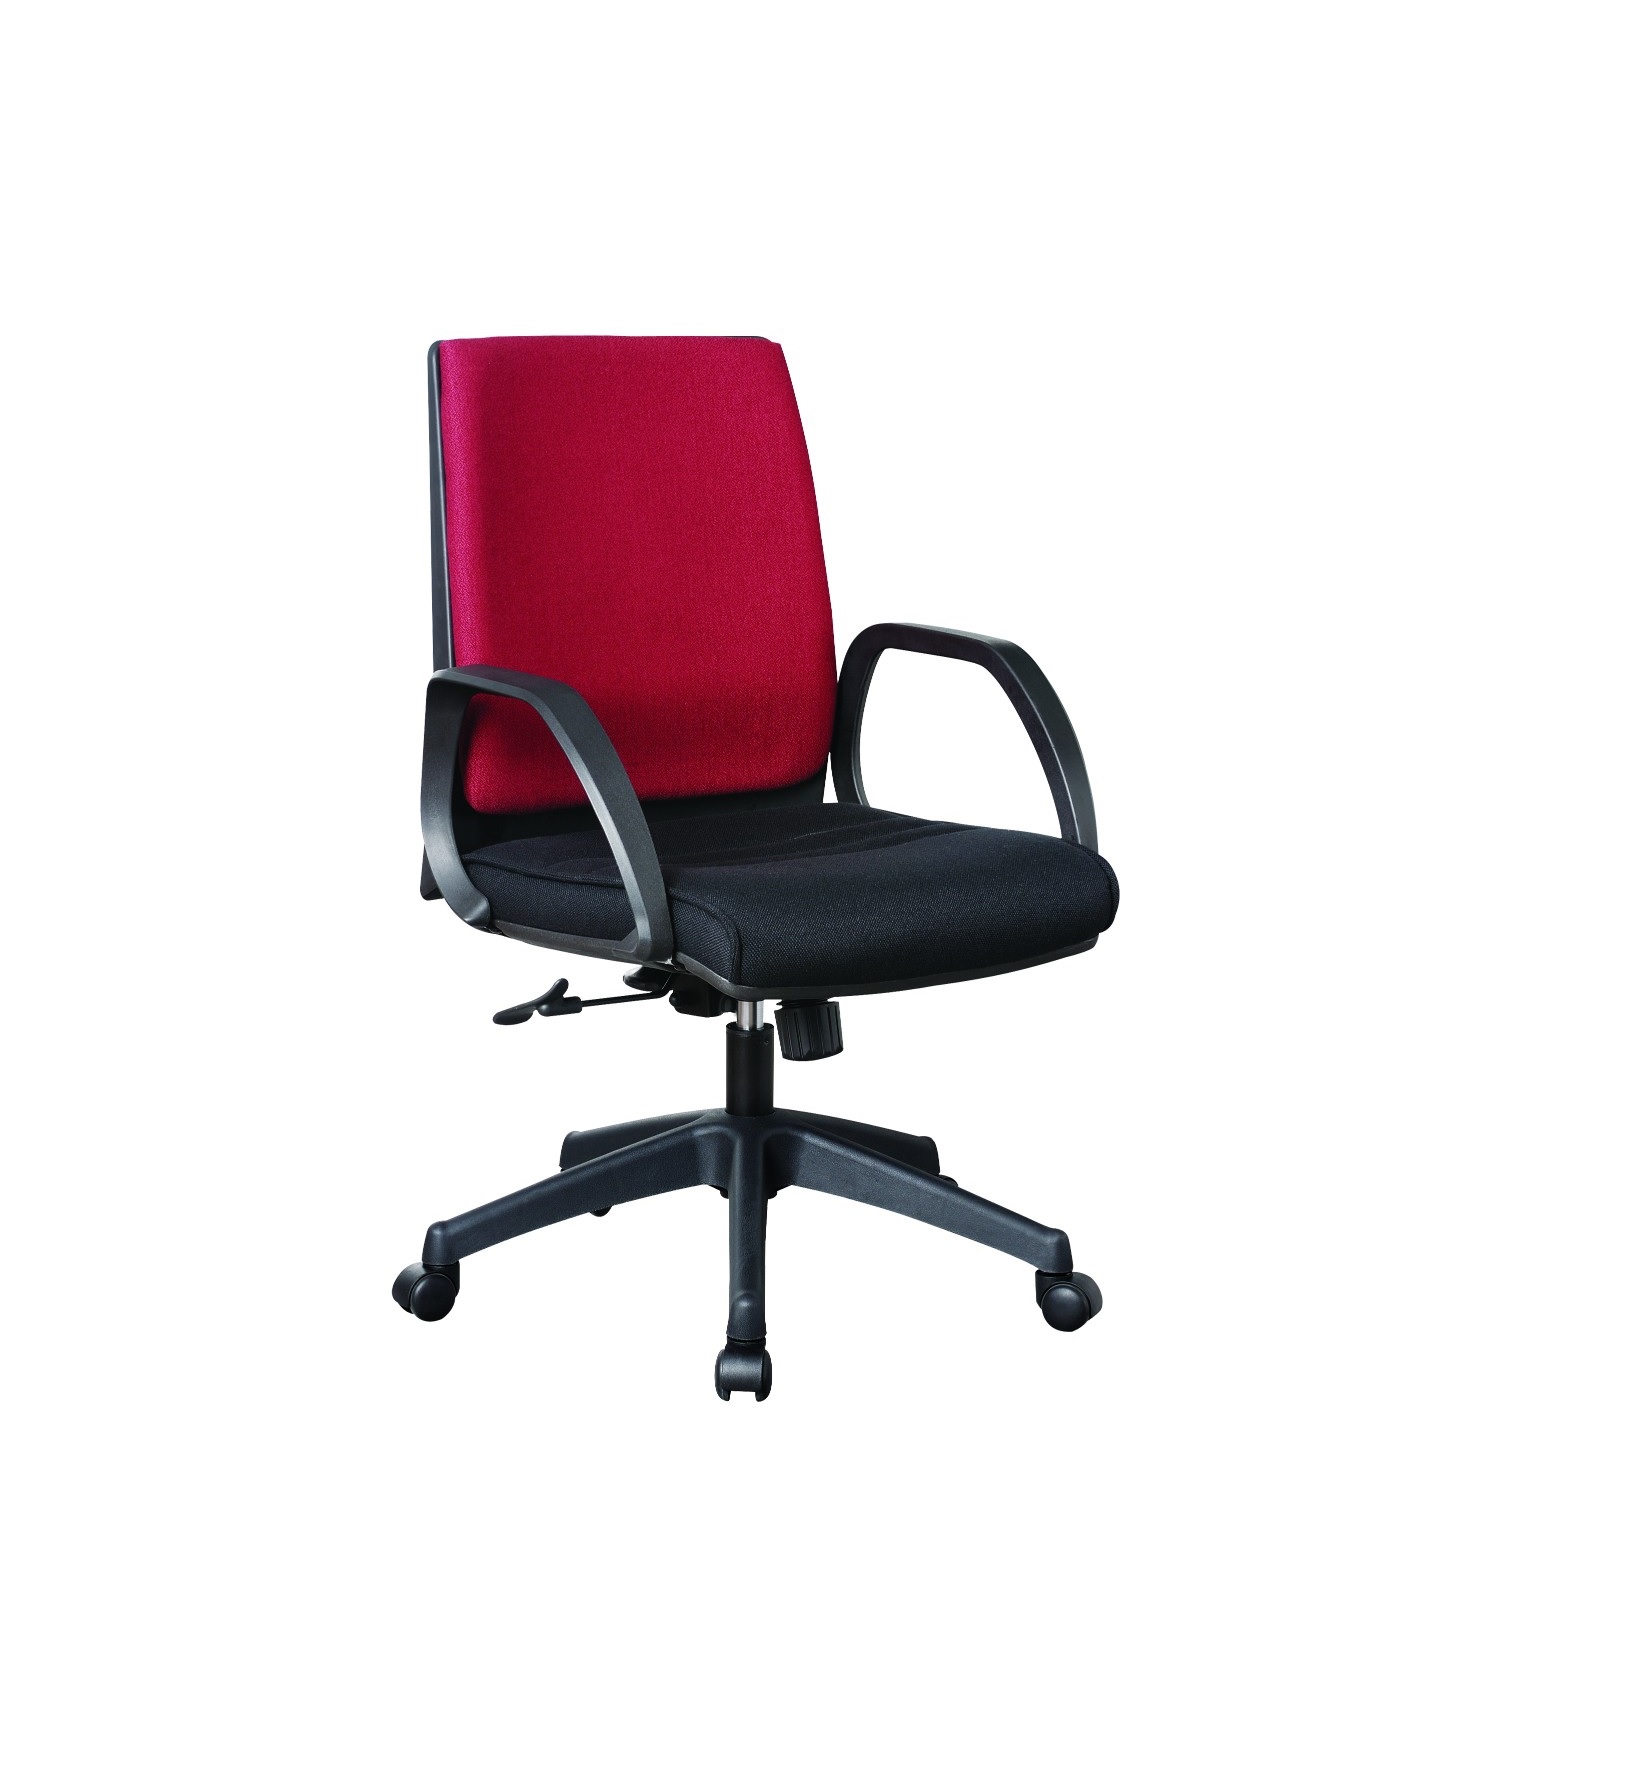 Bright – LB Executive Low Back Chair, Padded Seat & Back, Gaslift, Tilting Mechanism With Adjustment Control, Pu Arms & Base